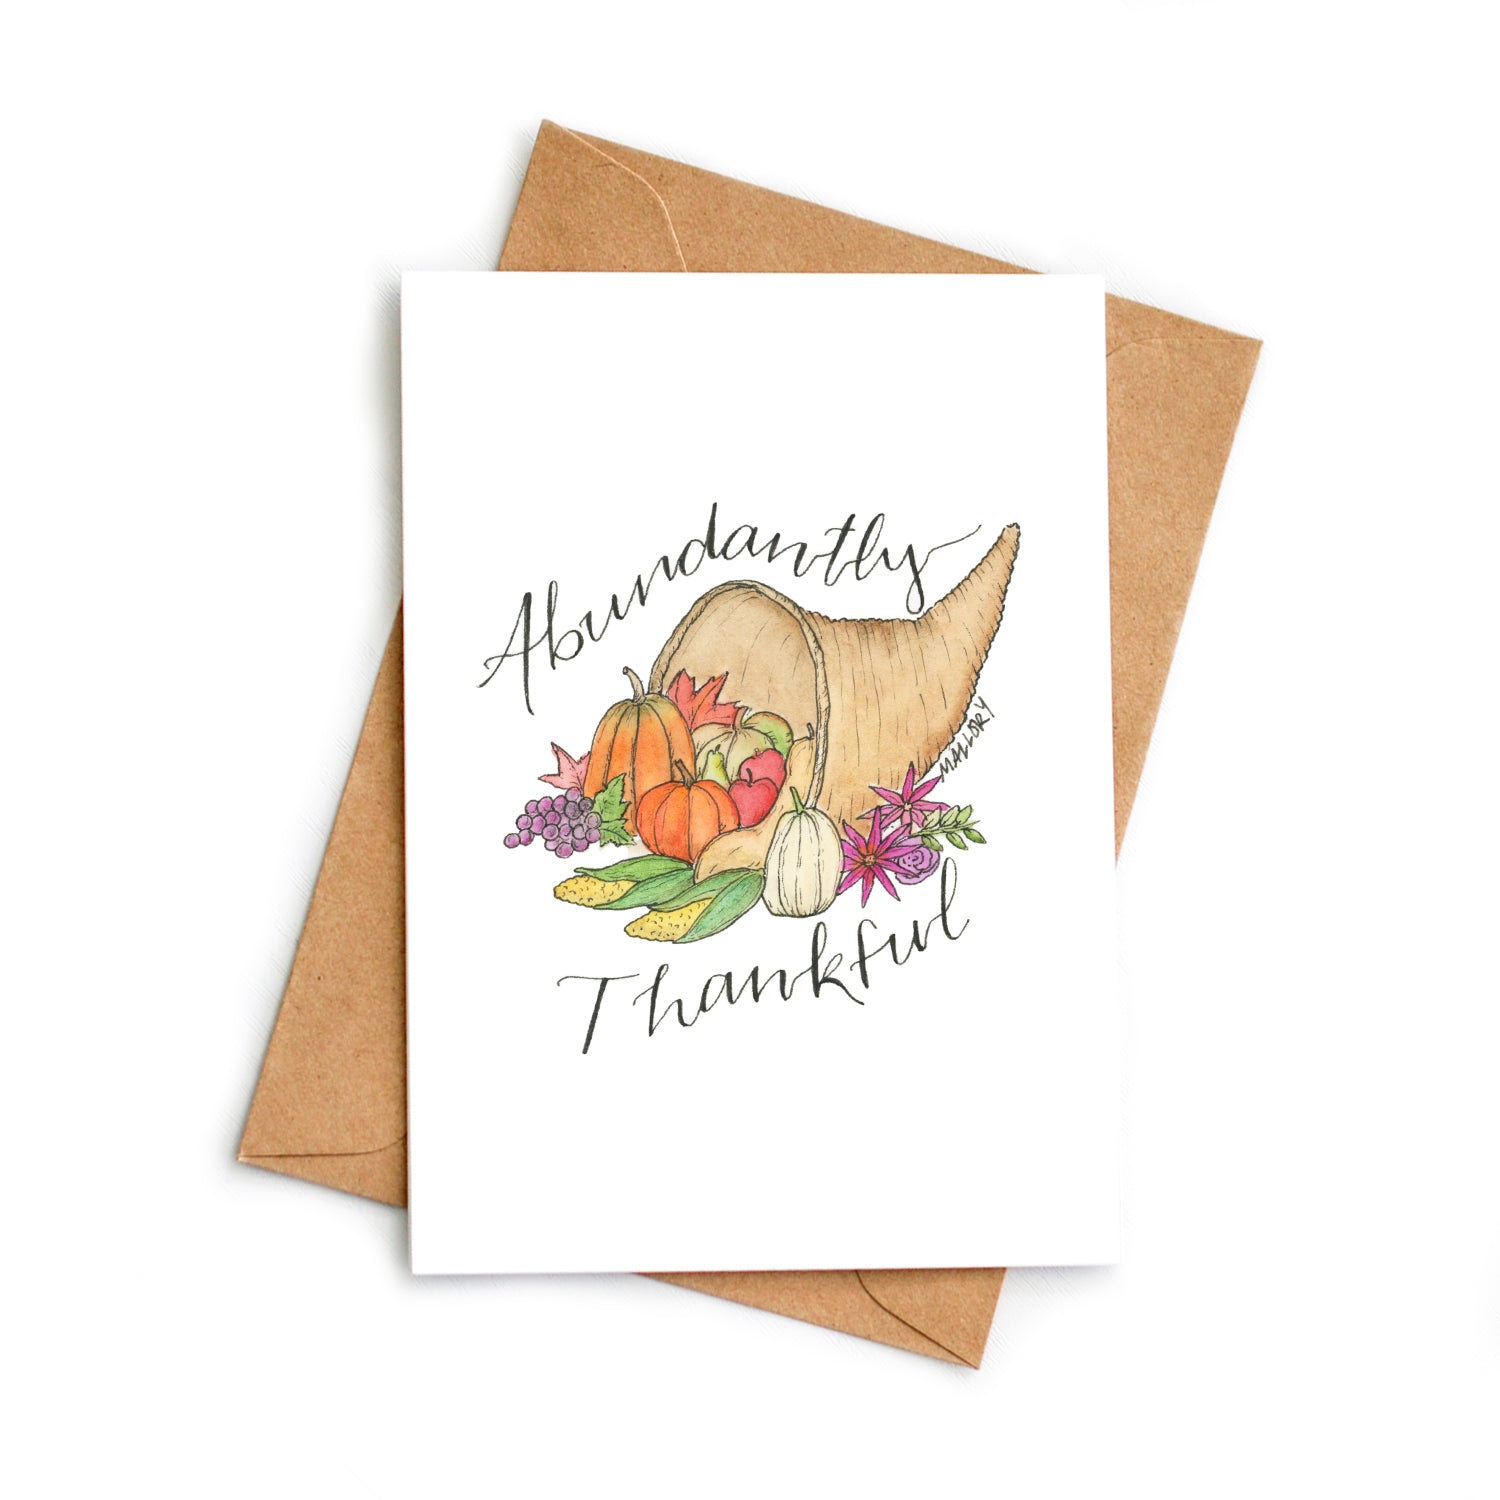 Thanksgiving card with a cornucopia filled with fresh pumpkins and vegetables in orange, green purple and natural colors. The words, "Abundantly Thankful" are depicted on the Thanksgiving card.